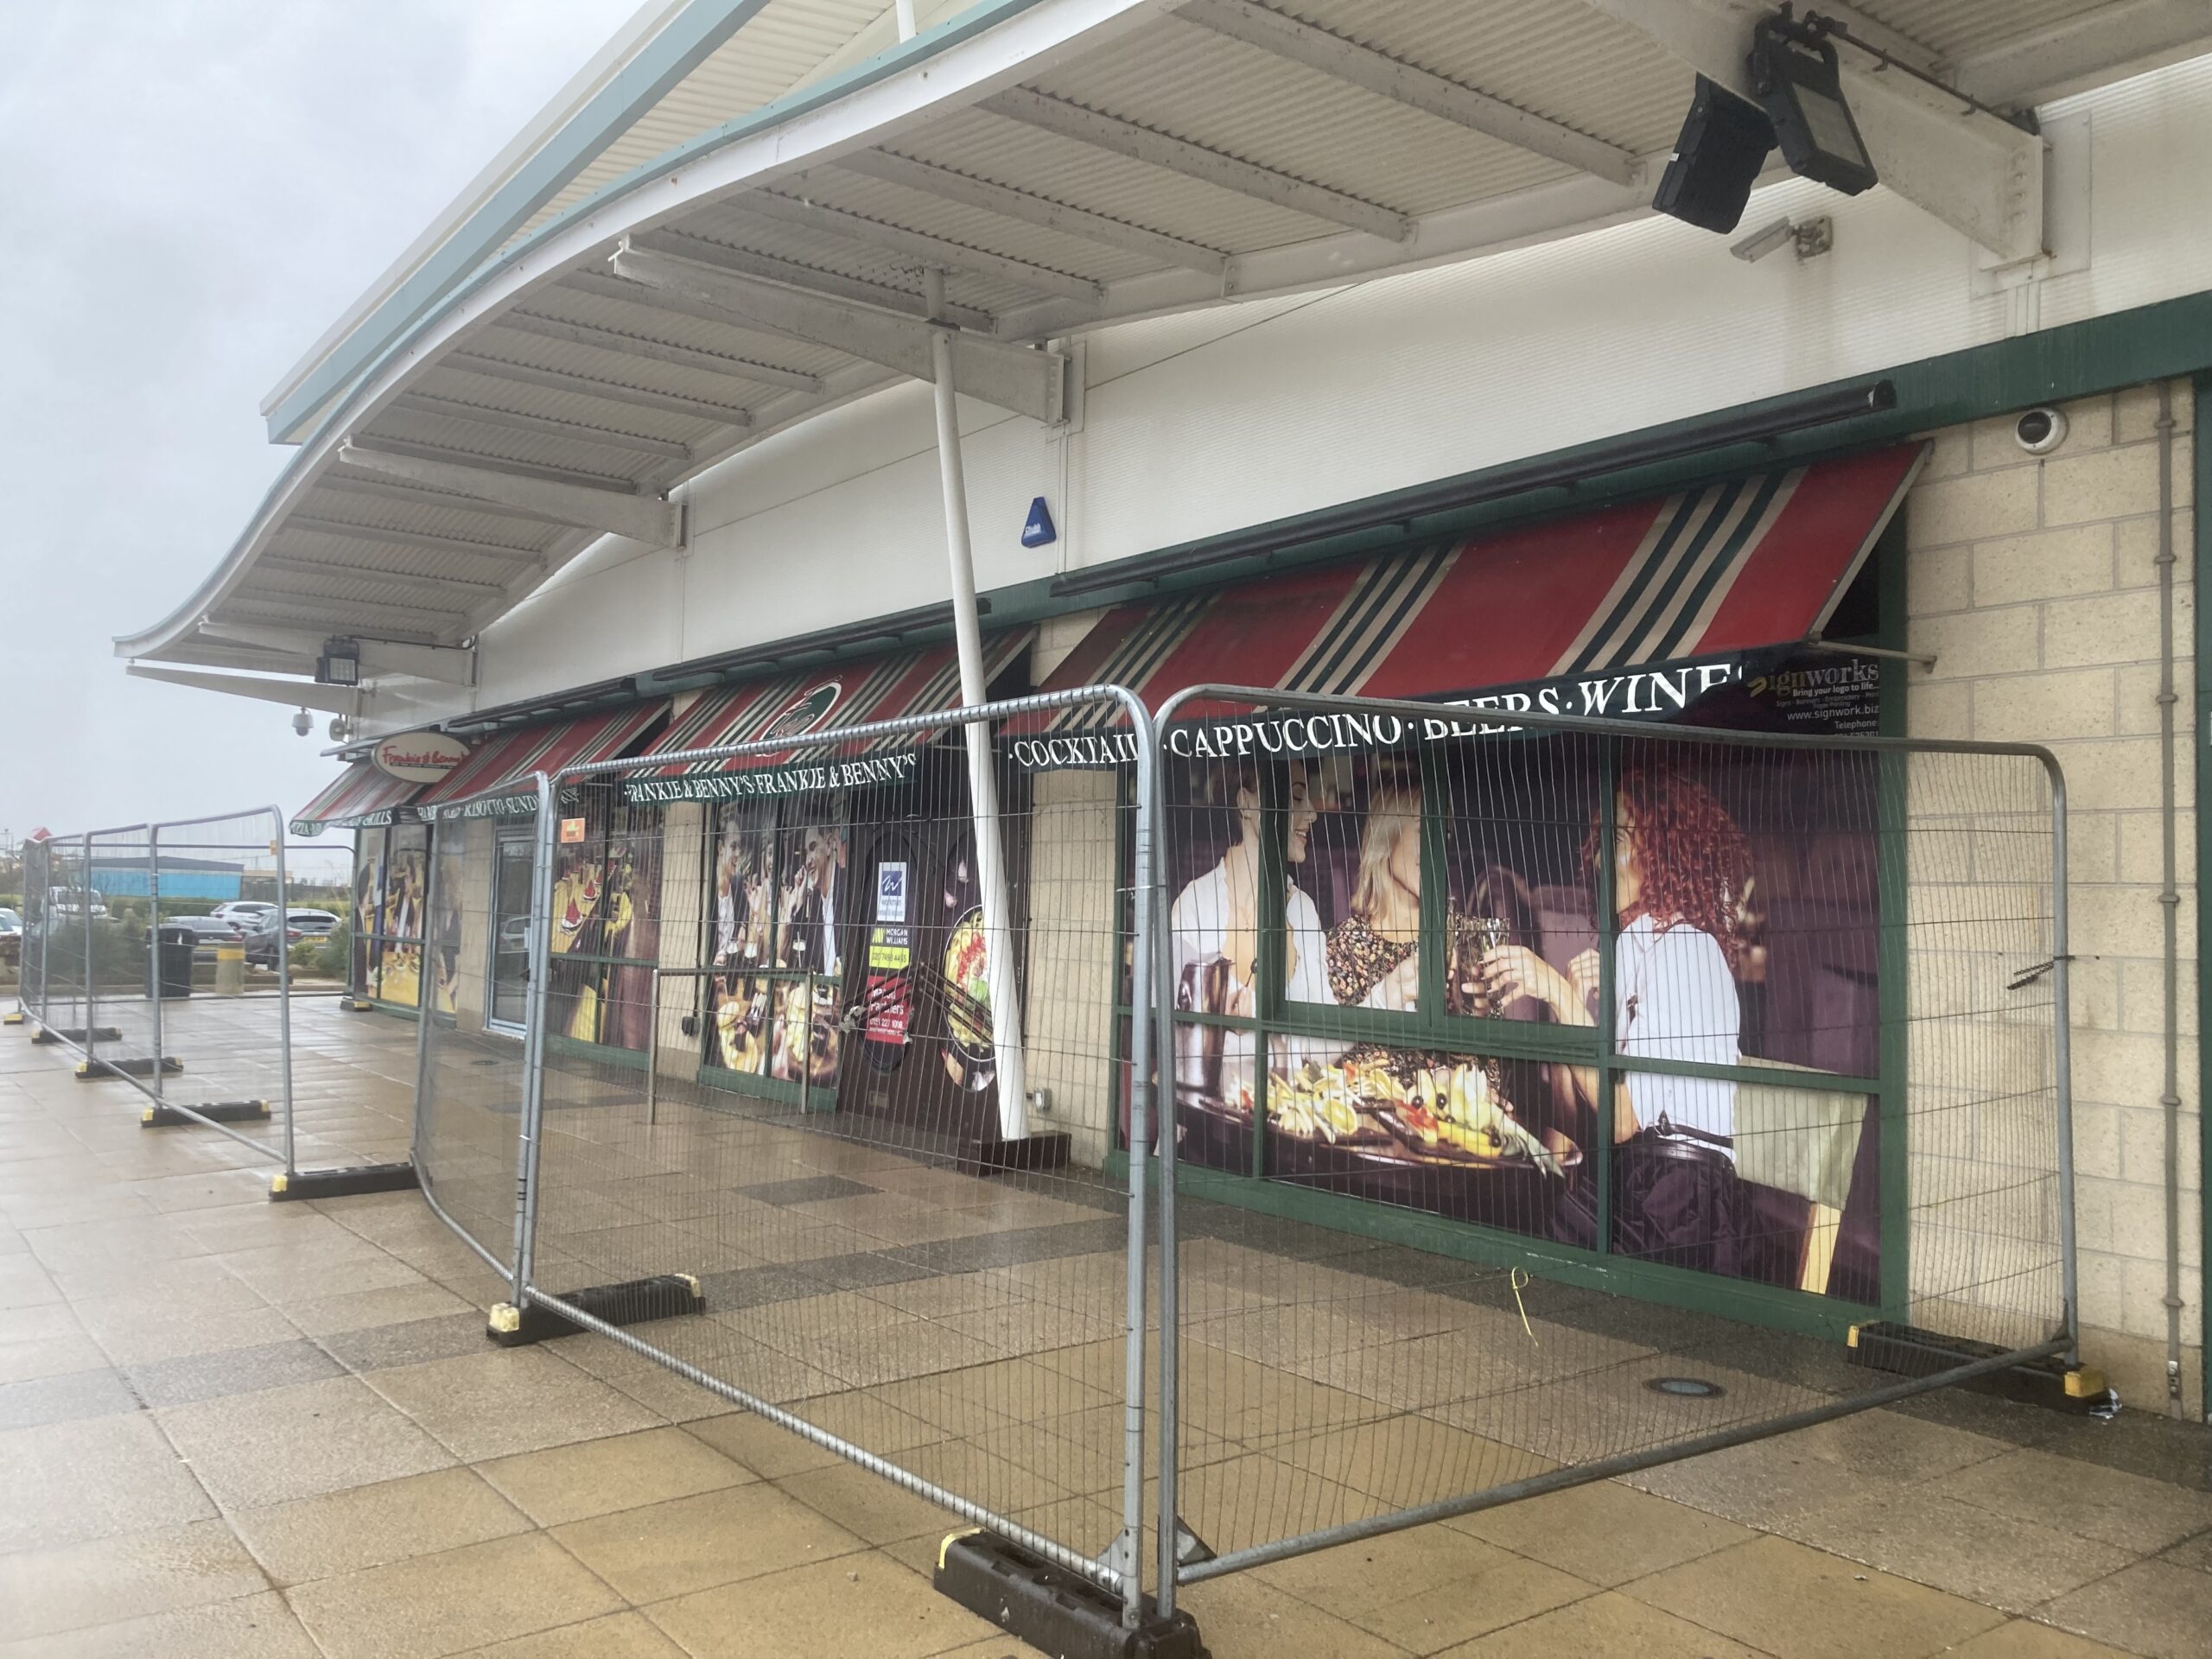 Building work is taking place to create two new restaurants in Southport; Kaspas Doner & Gyros and Kaspas Desserts, in the former Frankie & Bennys site at Ocean Plaza Leisure. Photo by Andrew Brown Stand Up For Southport